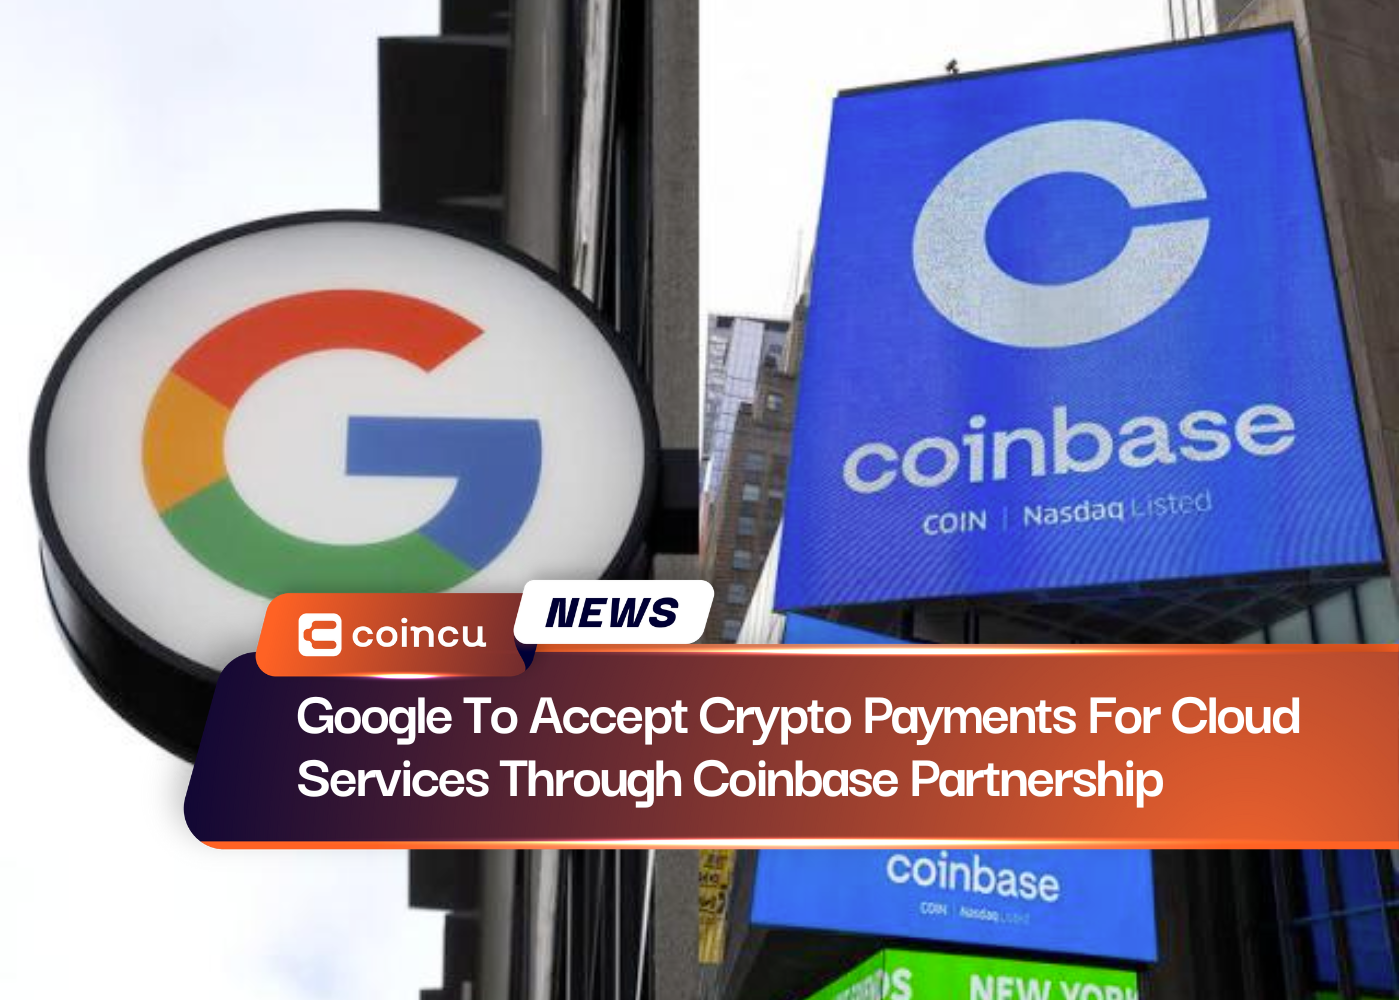 Google To Accept Crypto Payments For Cloud Services Through Coinbase Partnership